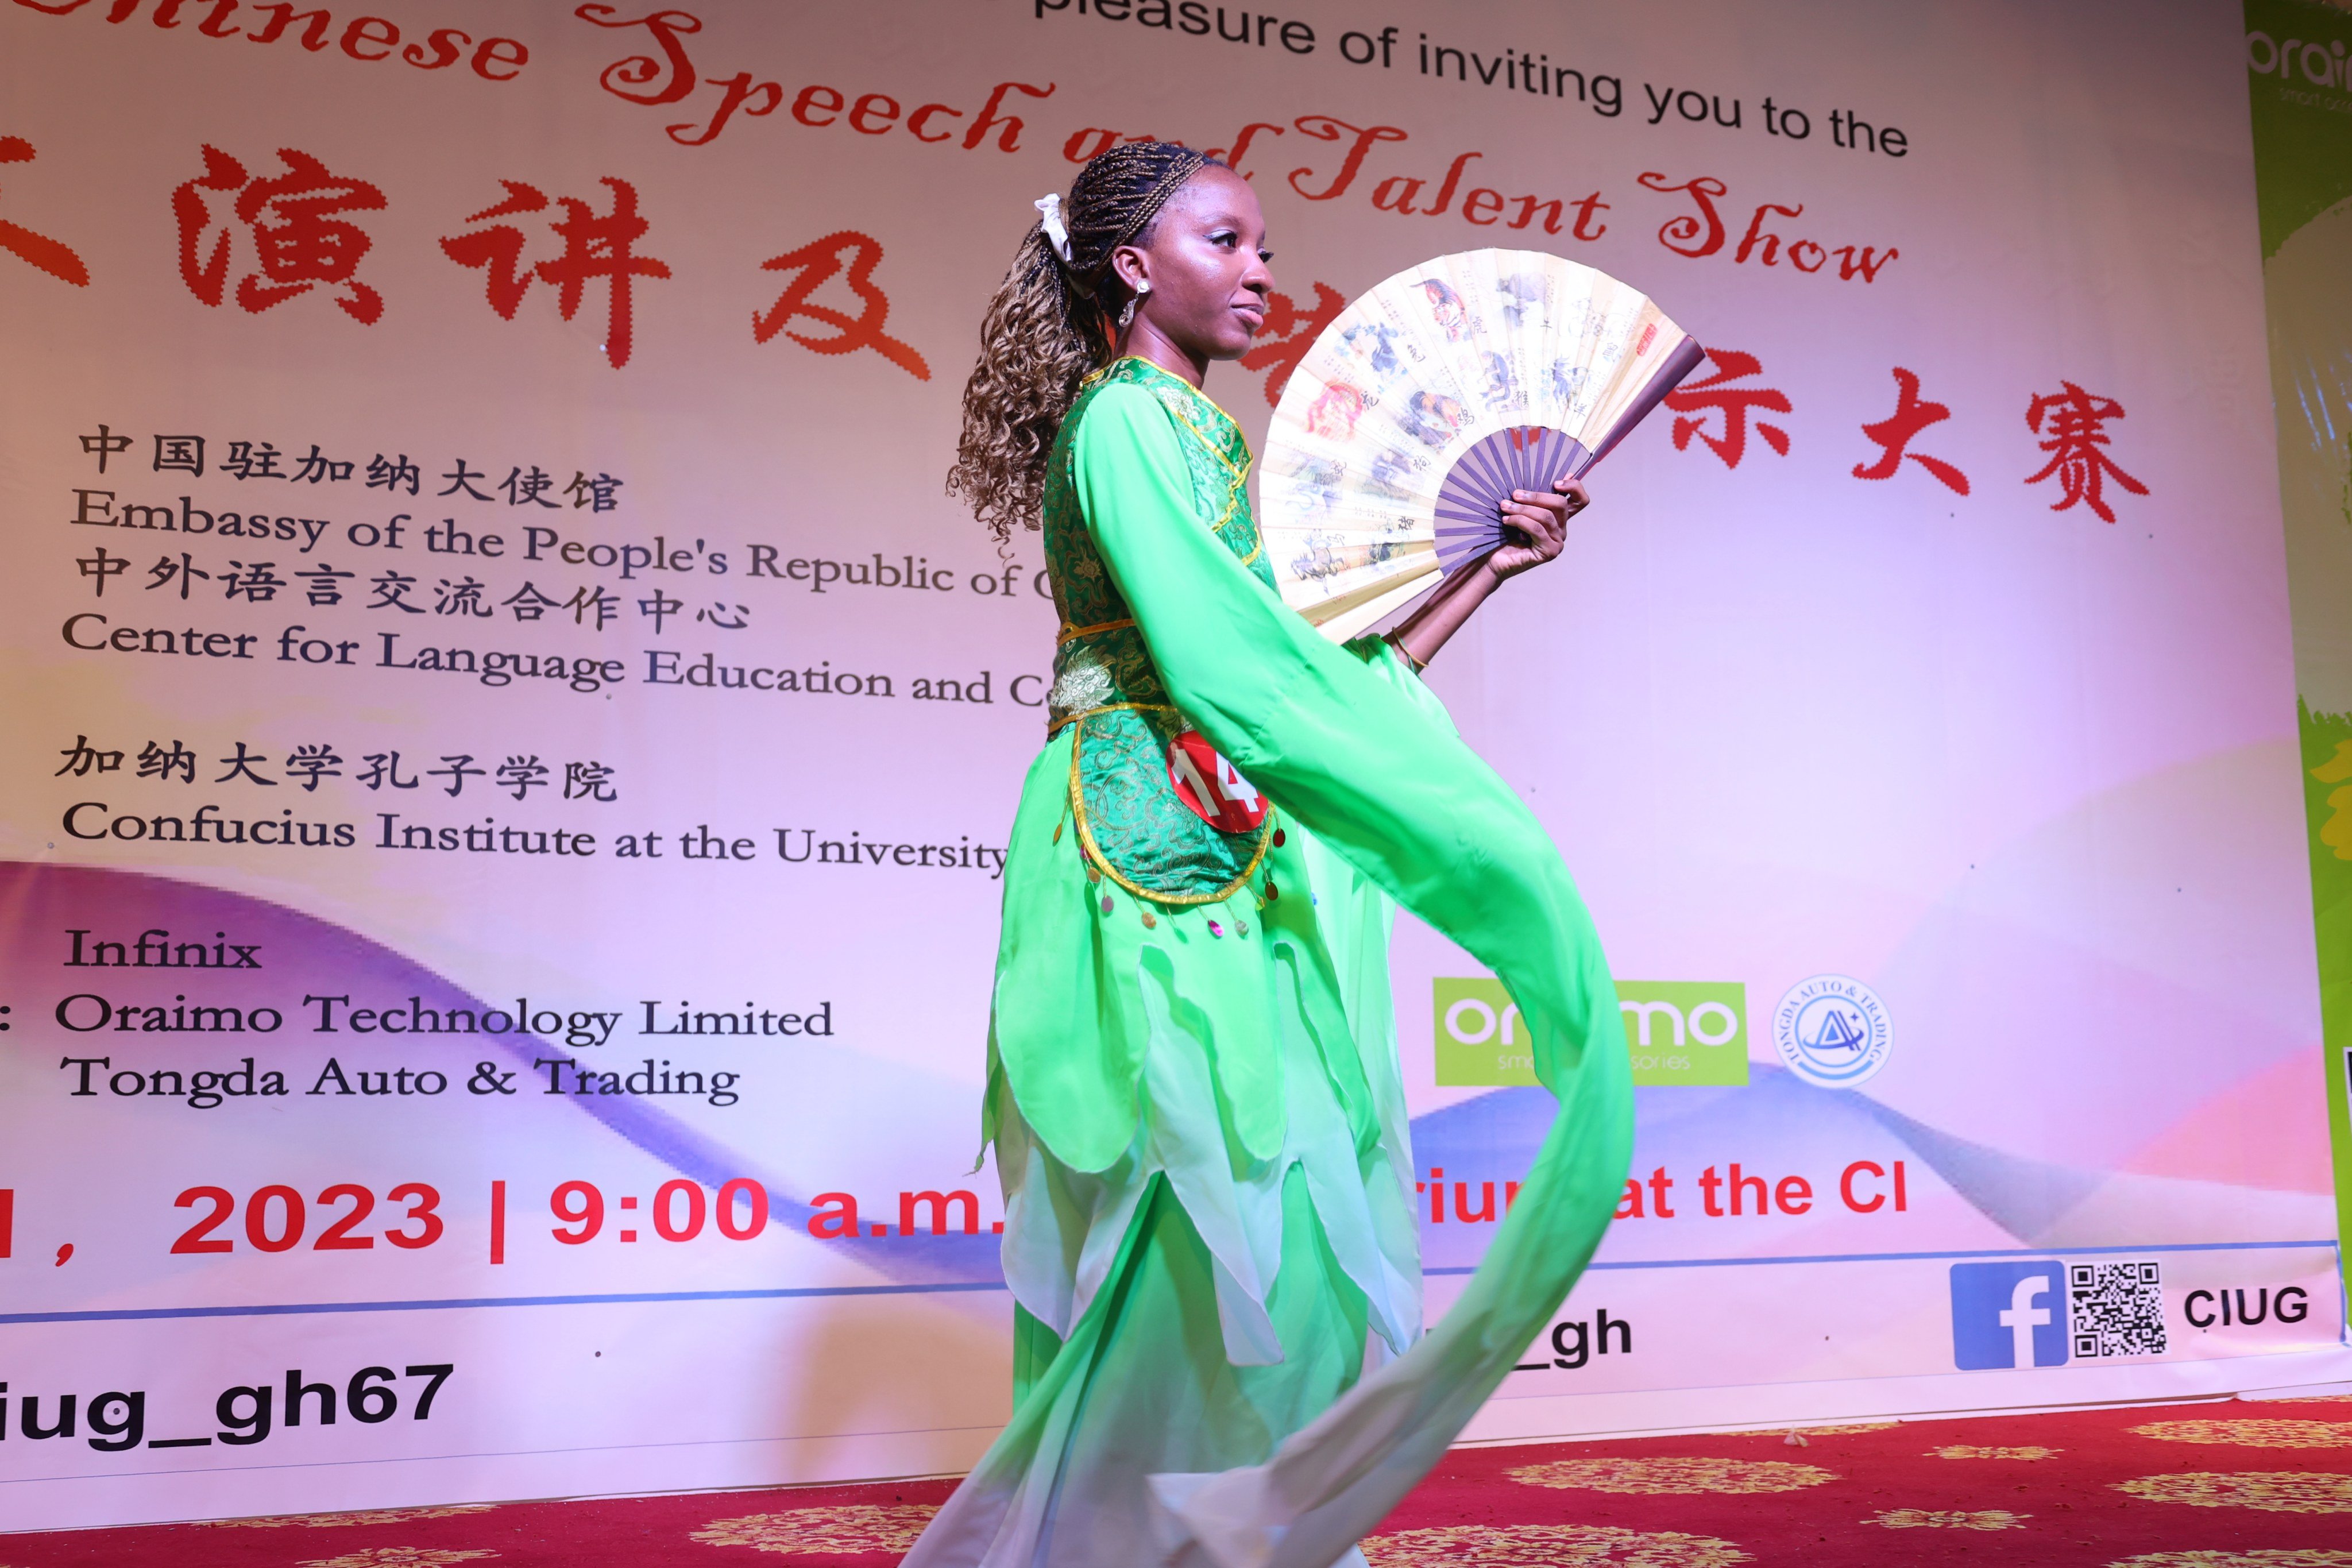 A Ghanaian student performs traditional Chinese dance during a show held by the Confucius Institute at the University of Ghana, in Accra, Ghana, on April 21. While upholding the equality of all civilisations, China also sets great store by people-to-people exchanges. Photo: Xinhua